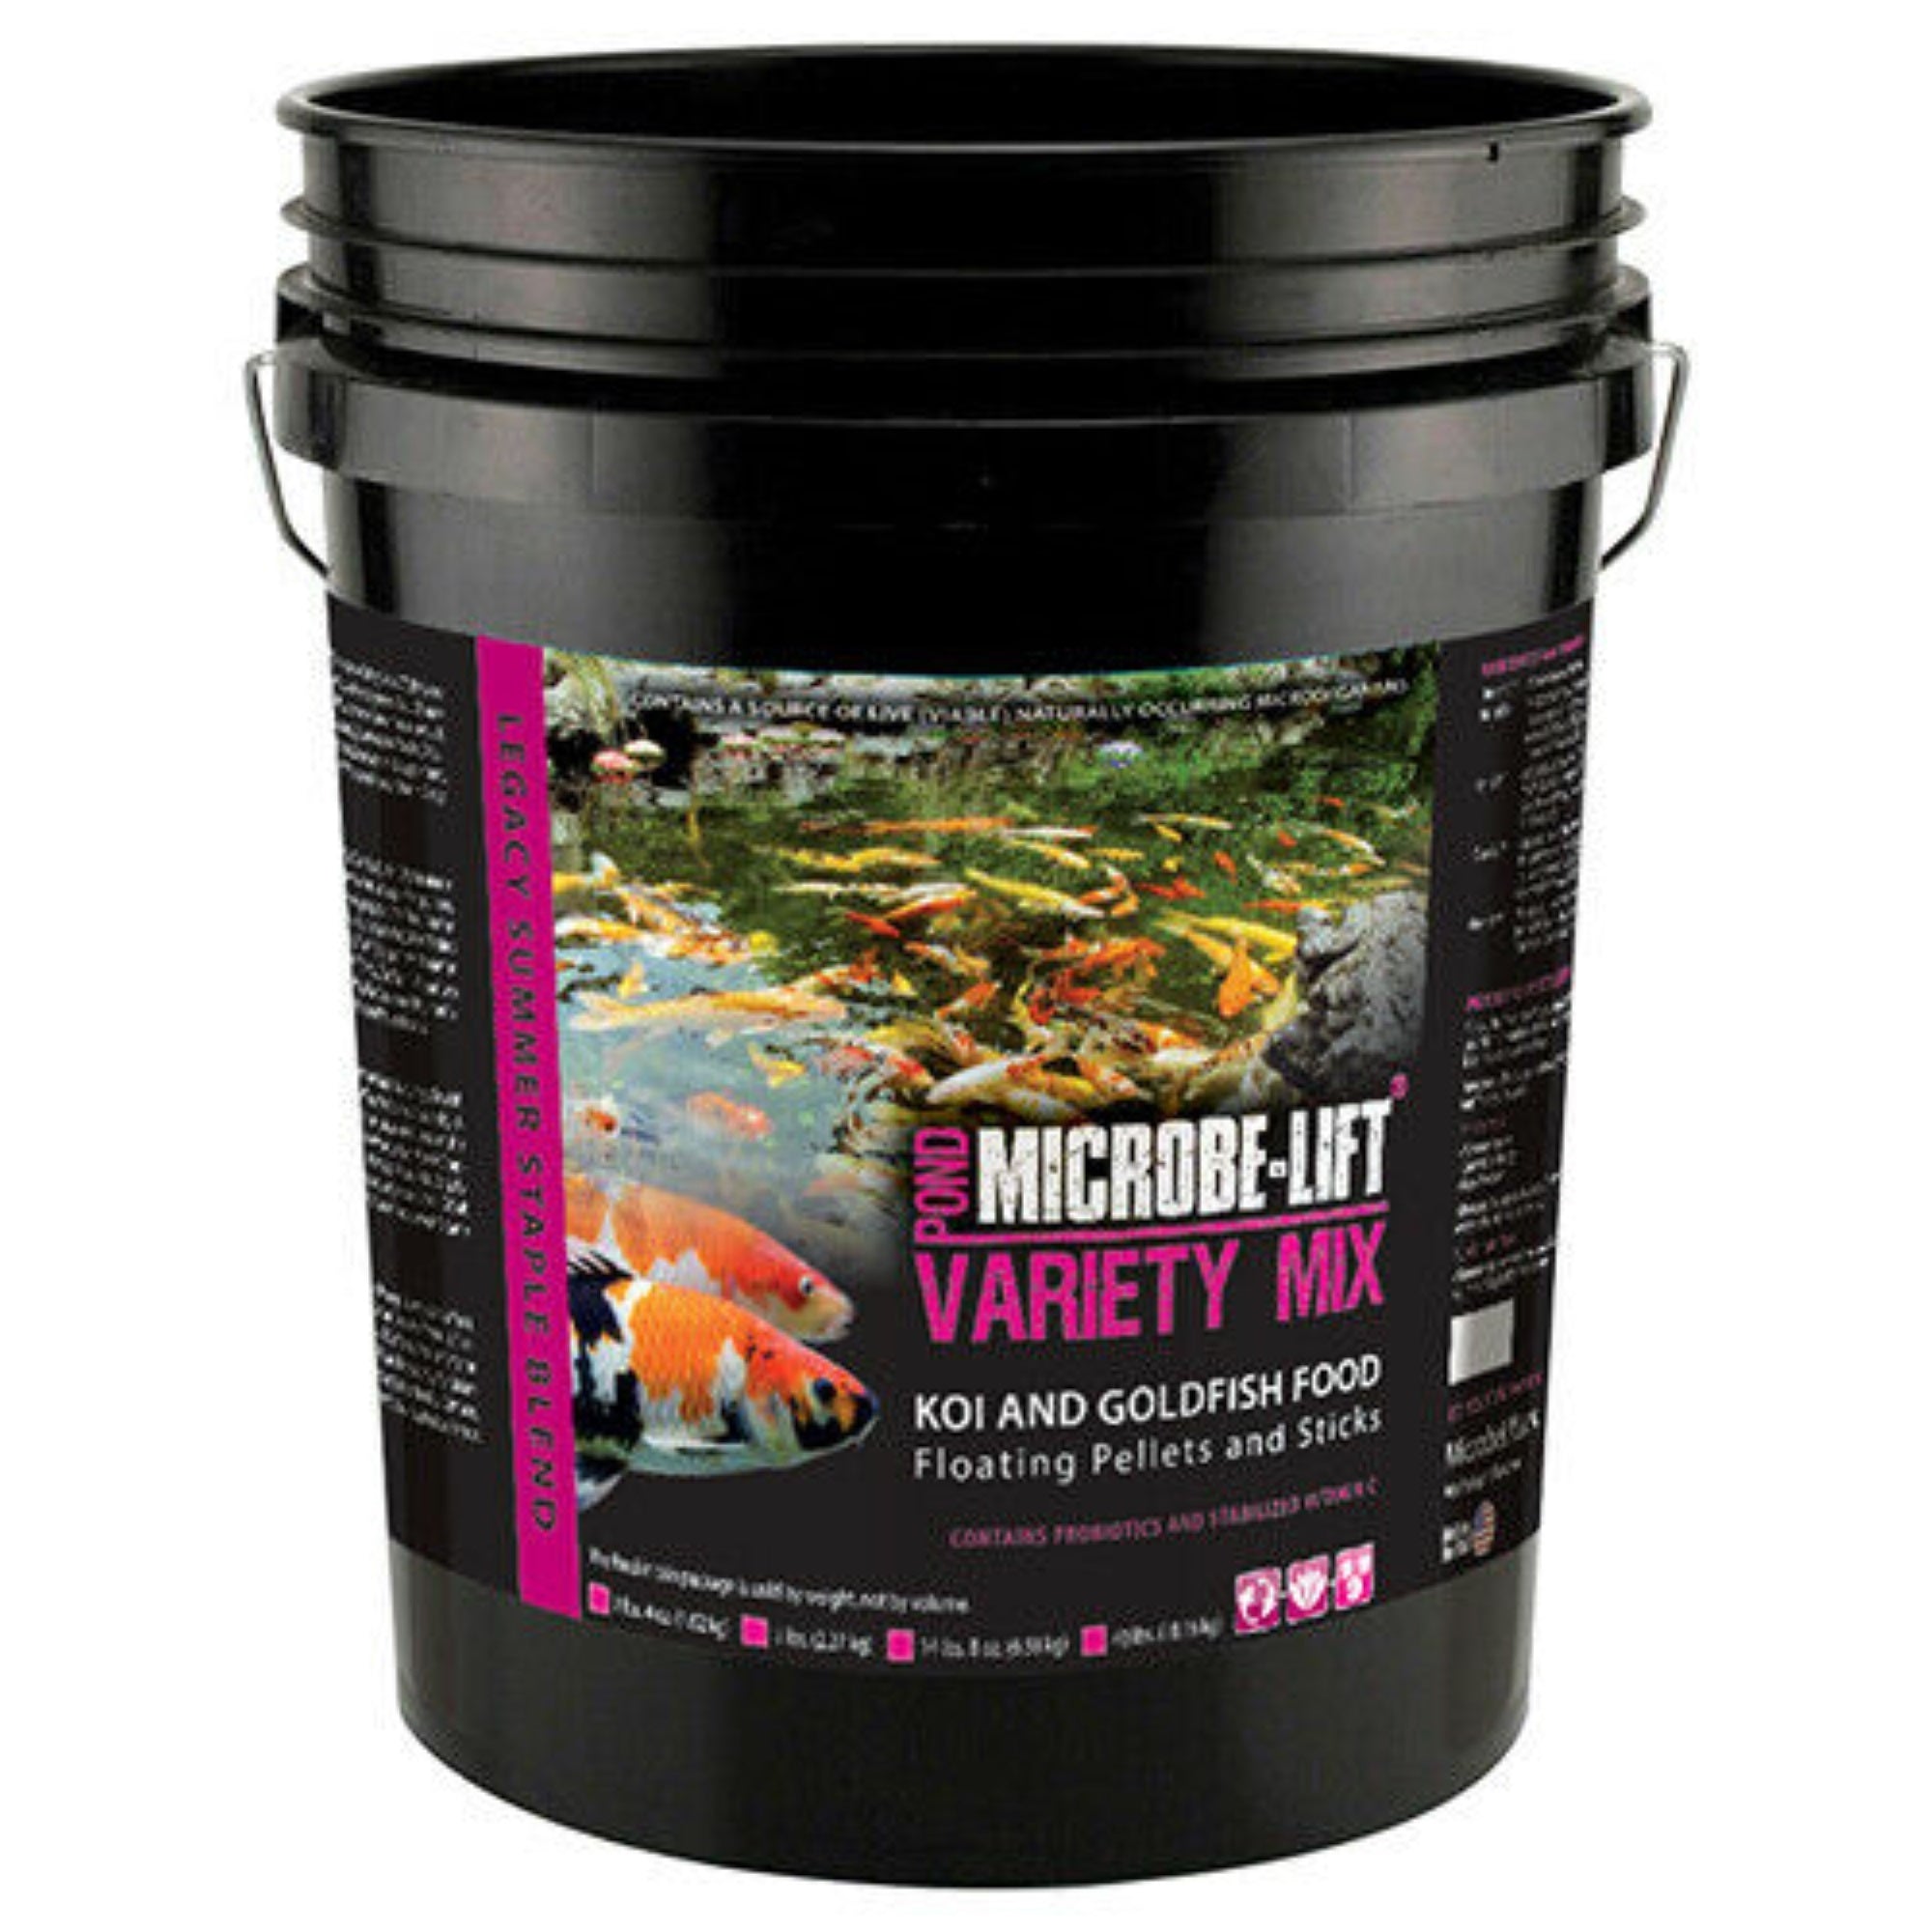 Ecological Labs Microbe-Lift Variety Mix Floating Pellets, 14.5lb